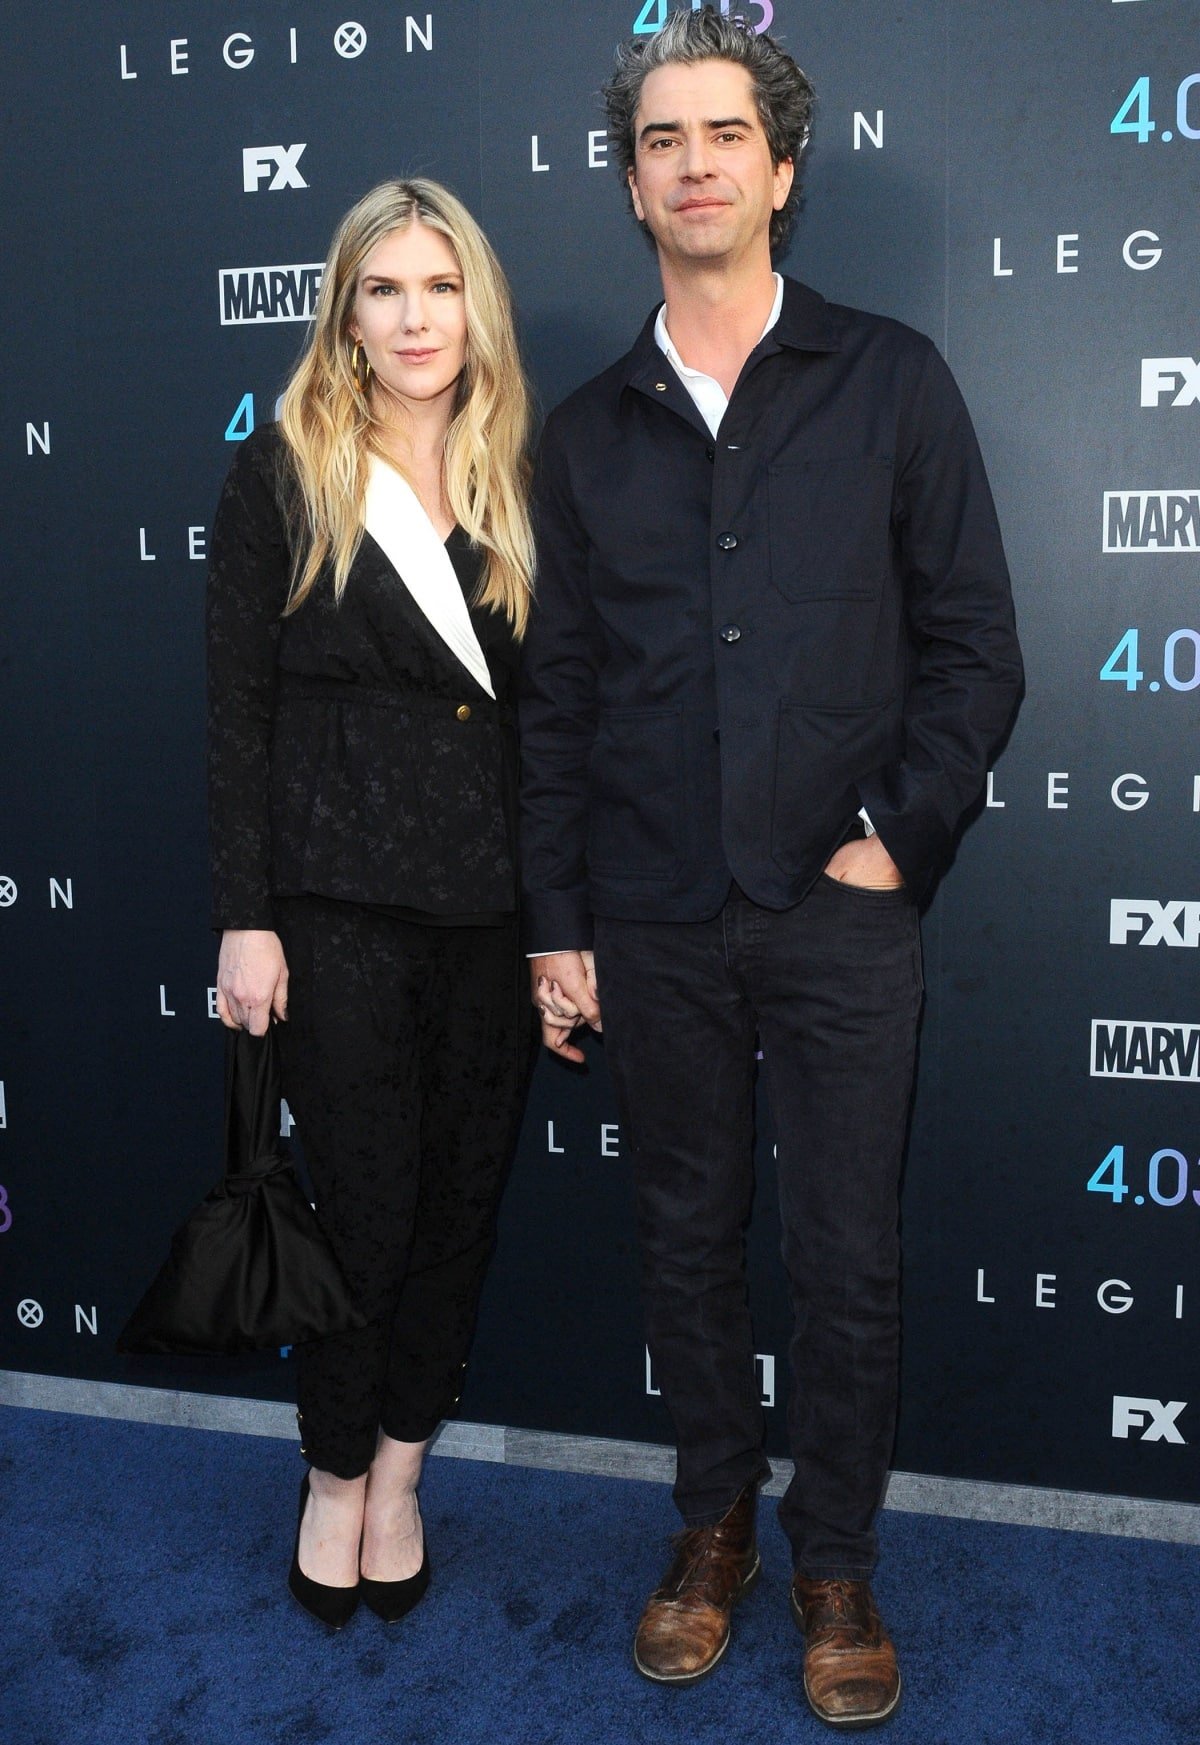 There’s a six-year age gap between Lily Rabe and Hamish Linklater, with the latter being eight inches taller than the former